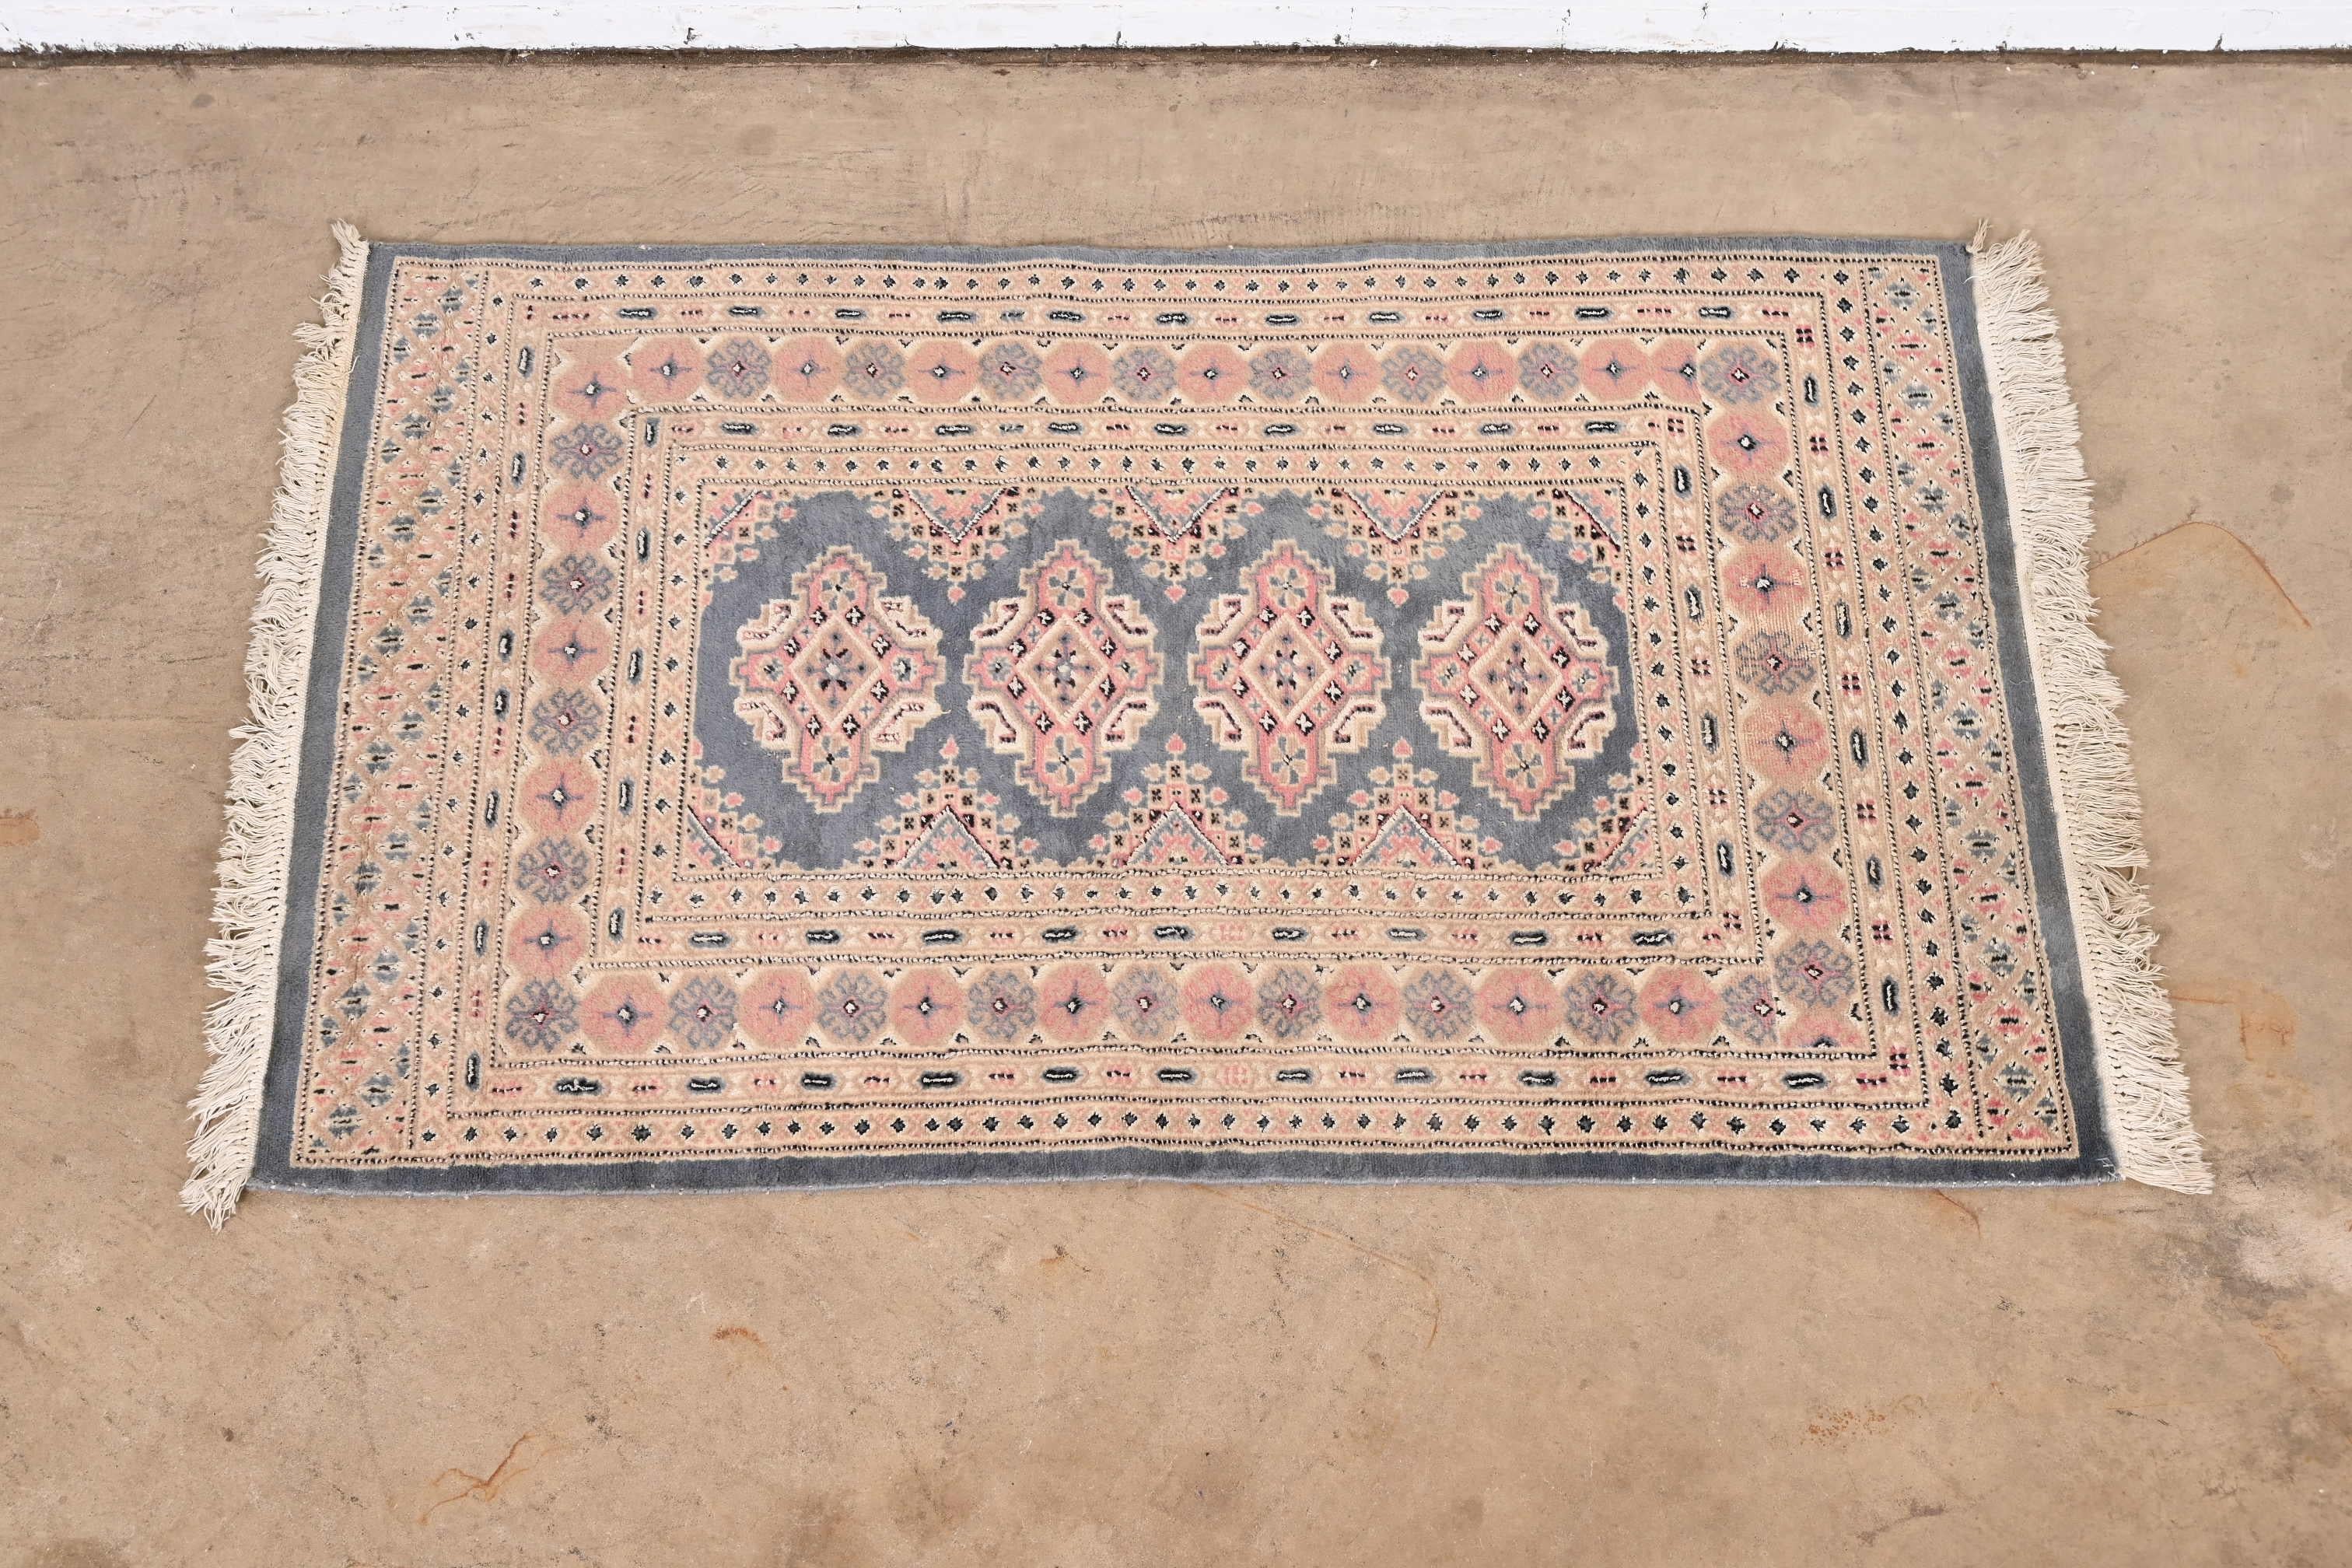 20th Century Vintage Hand-Woven Persian Bokhara Wool Rug in Light Blue, Pink, and Cream